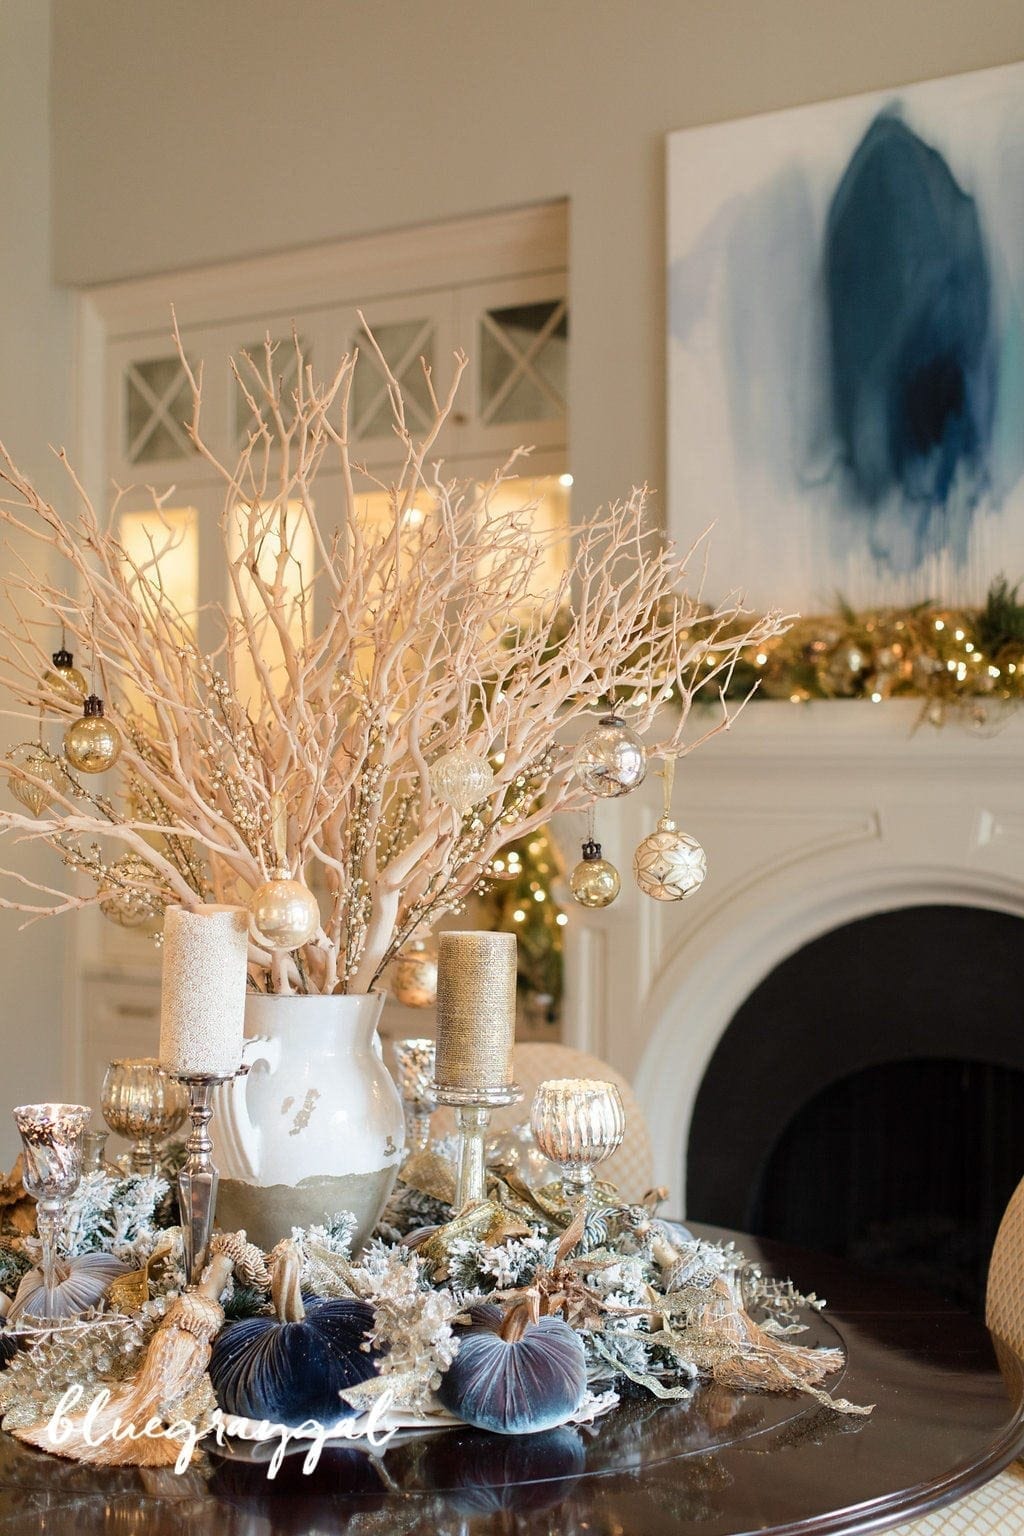 Holiday Centerpiece Decor with manzanita branches and a tuscan urn on a round dining room table